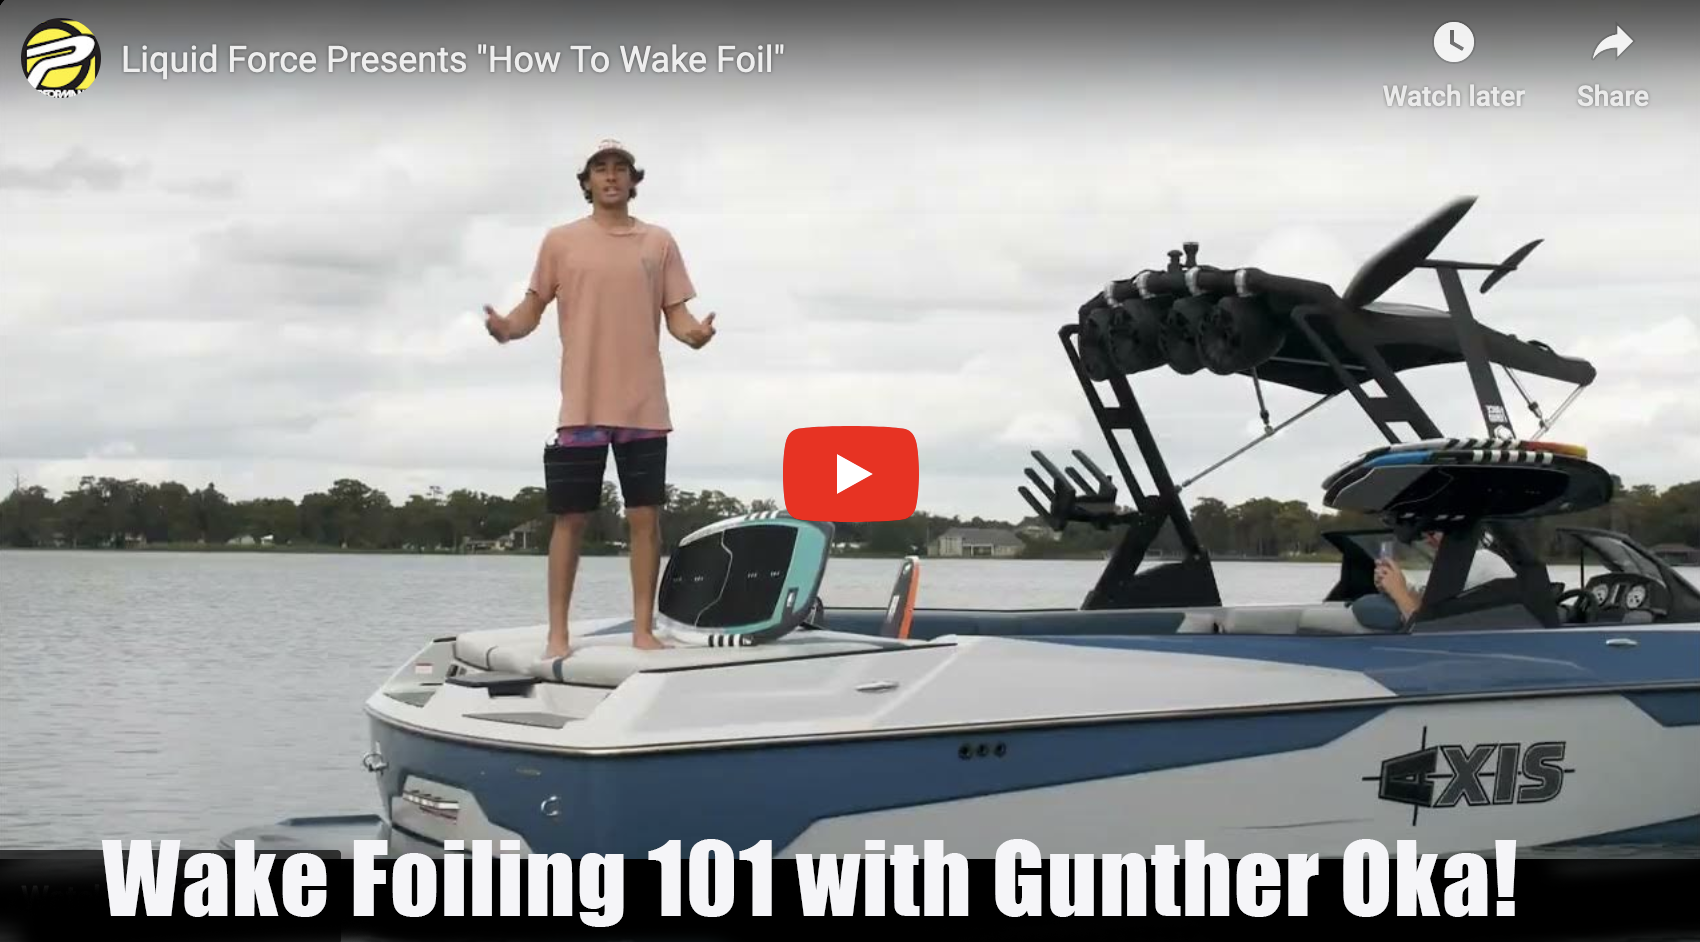 Wake Foiling 101:  How to Learn To Wake Foil with Gunther Oka & Liquid Force